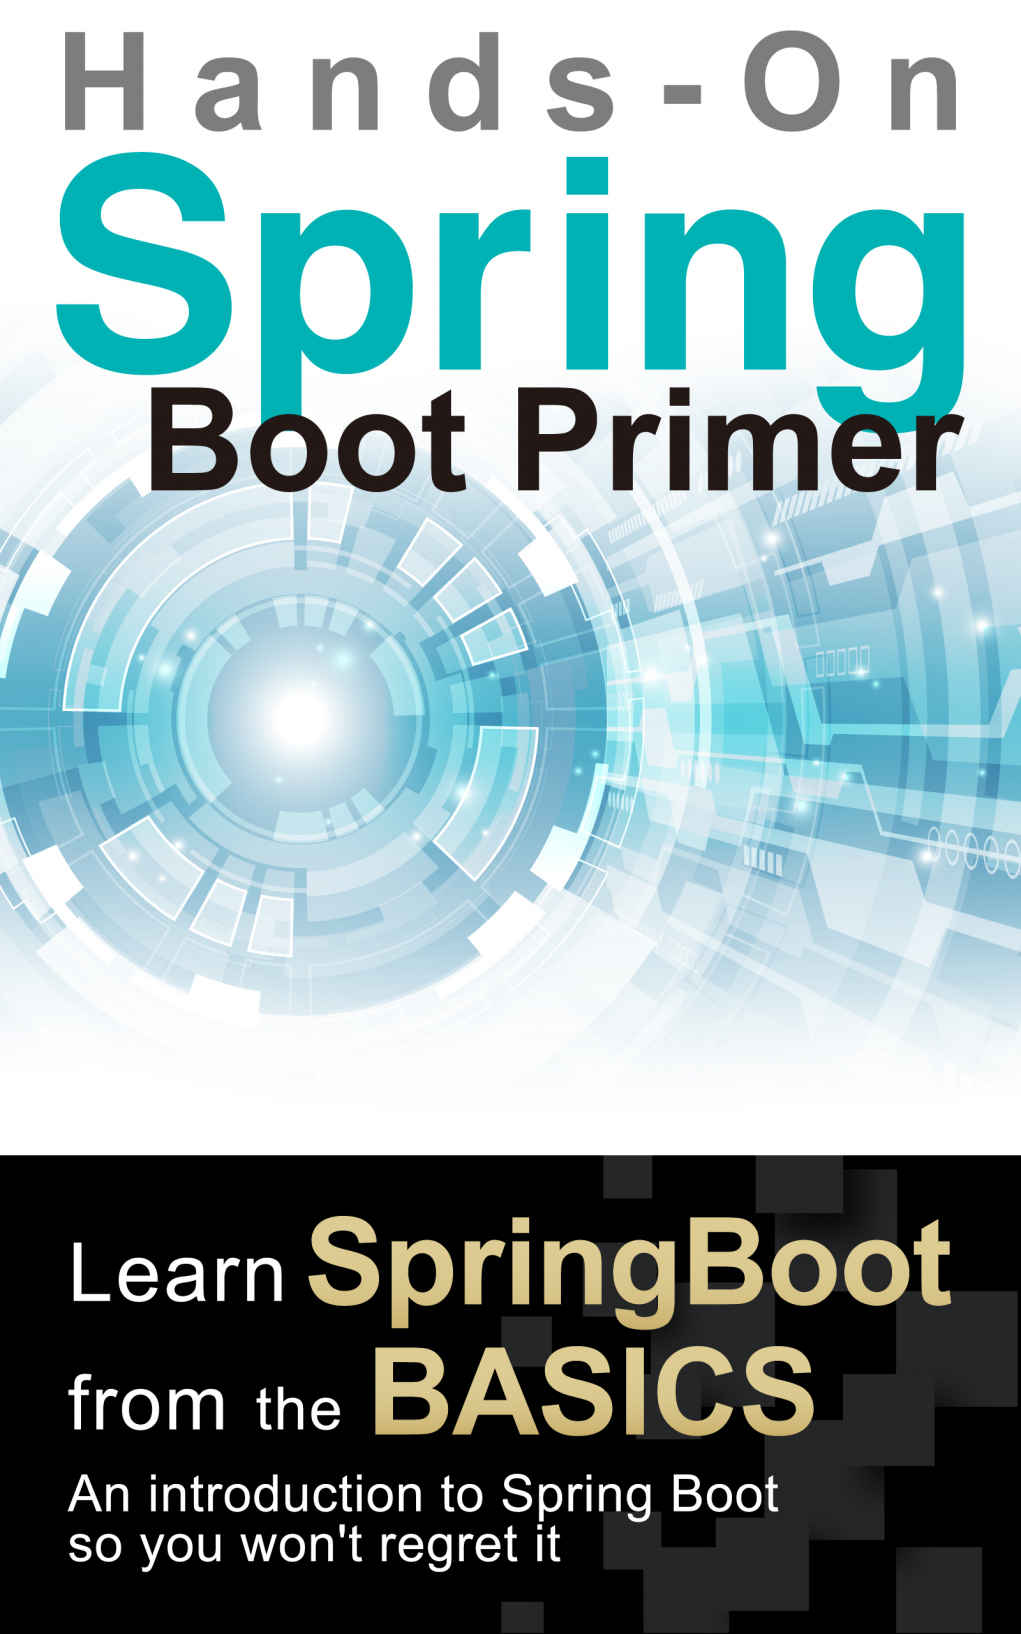 Spring Boot Primer: Learn Spring Boot From the Basics. An Introduction to Spring Boot So You Won't Regret It